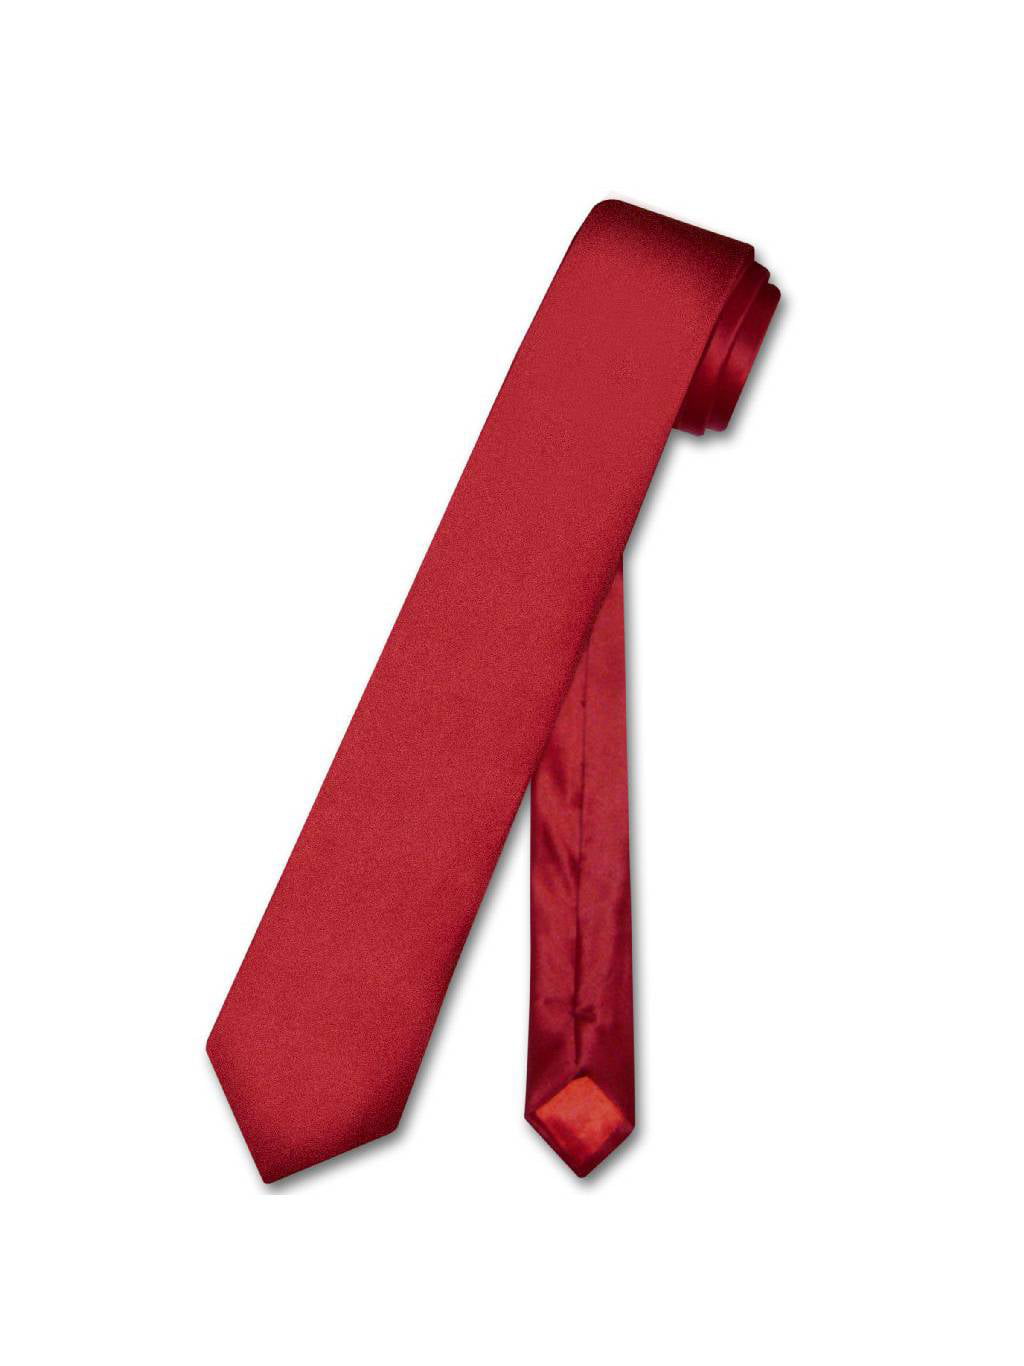 New Polyester Men's 1.5" skinny Neck Tie only solid formal wedding work red 